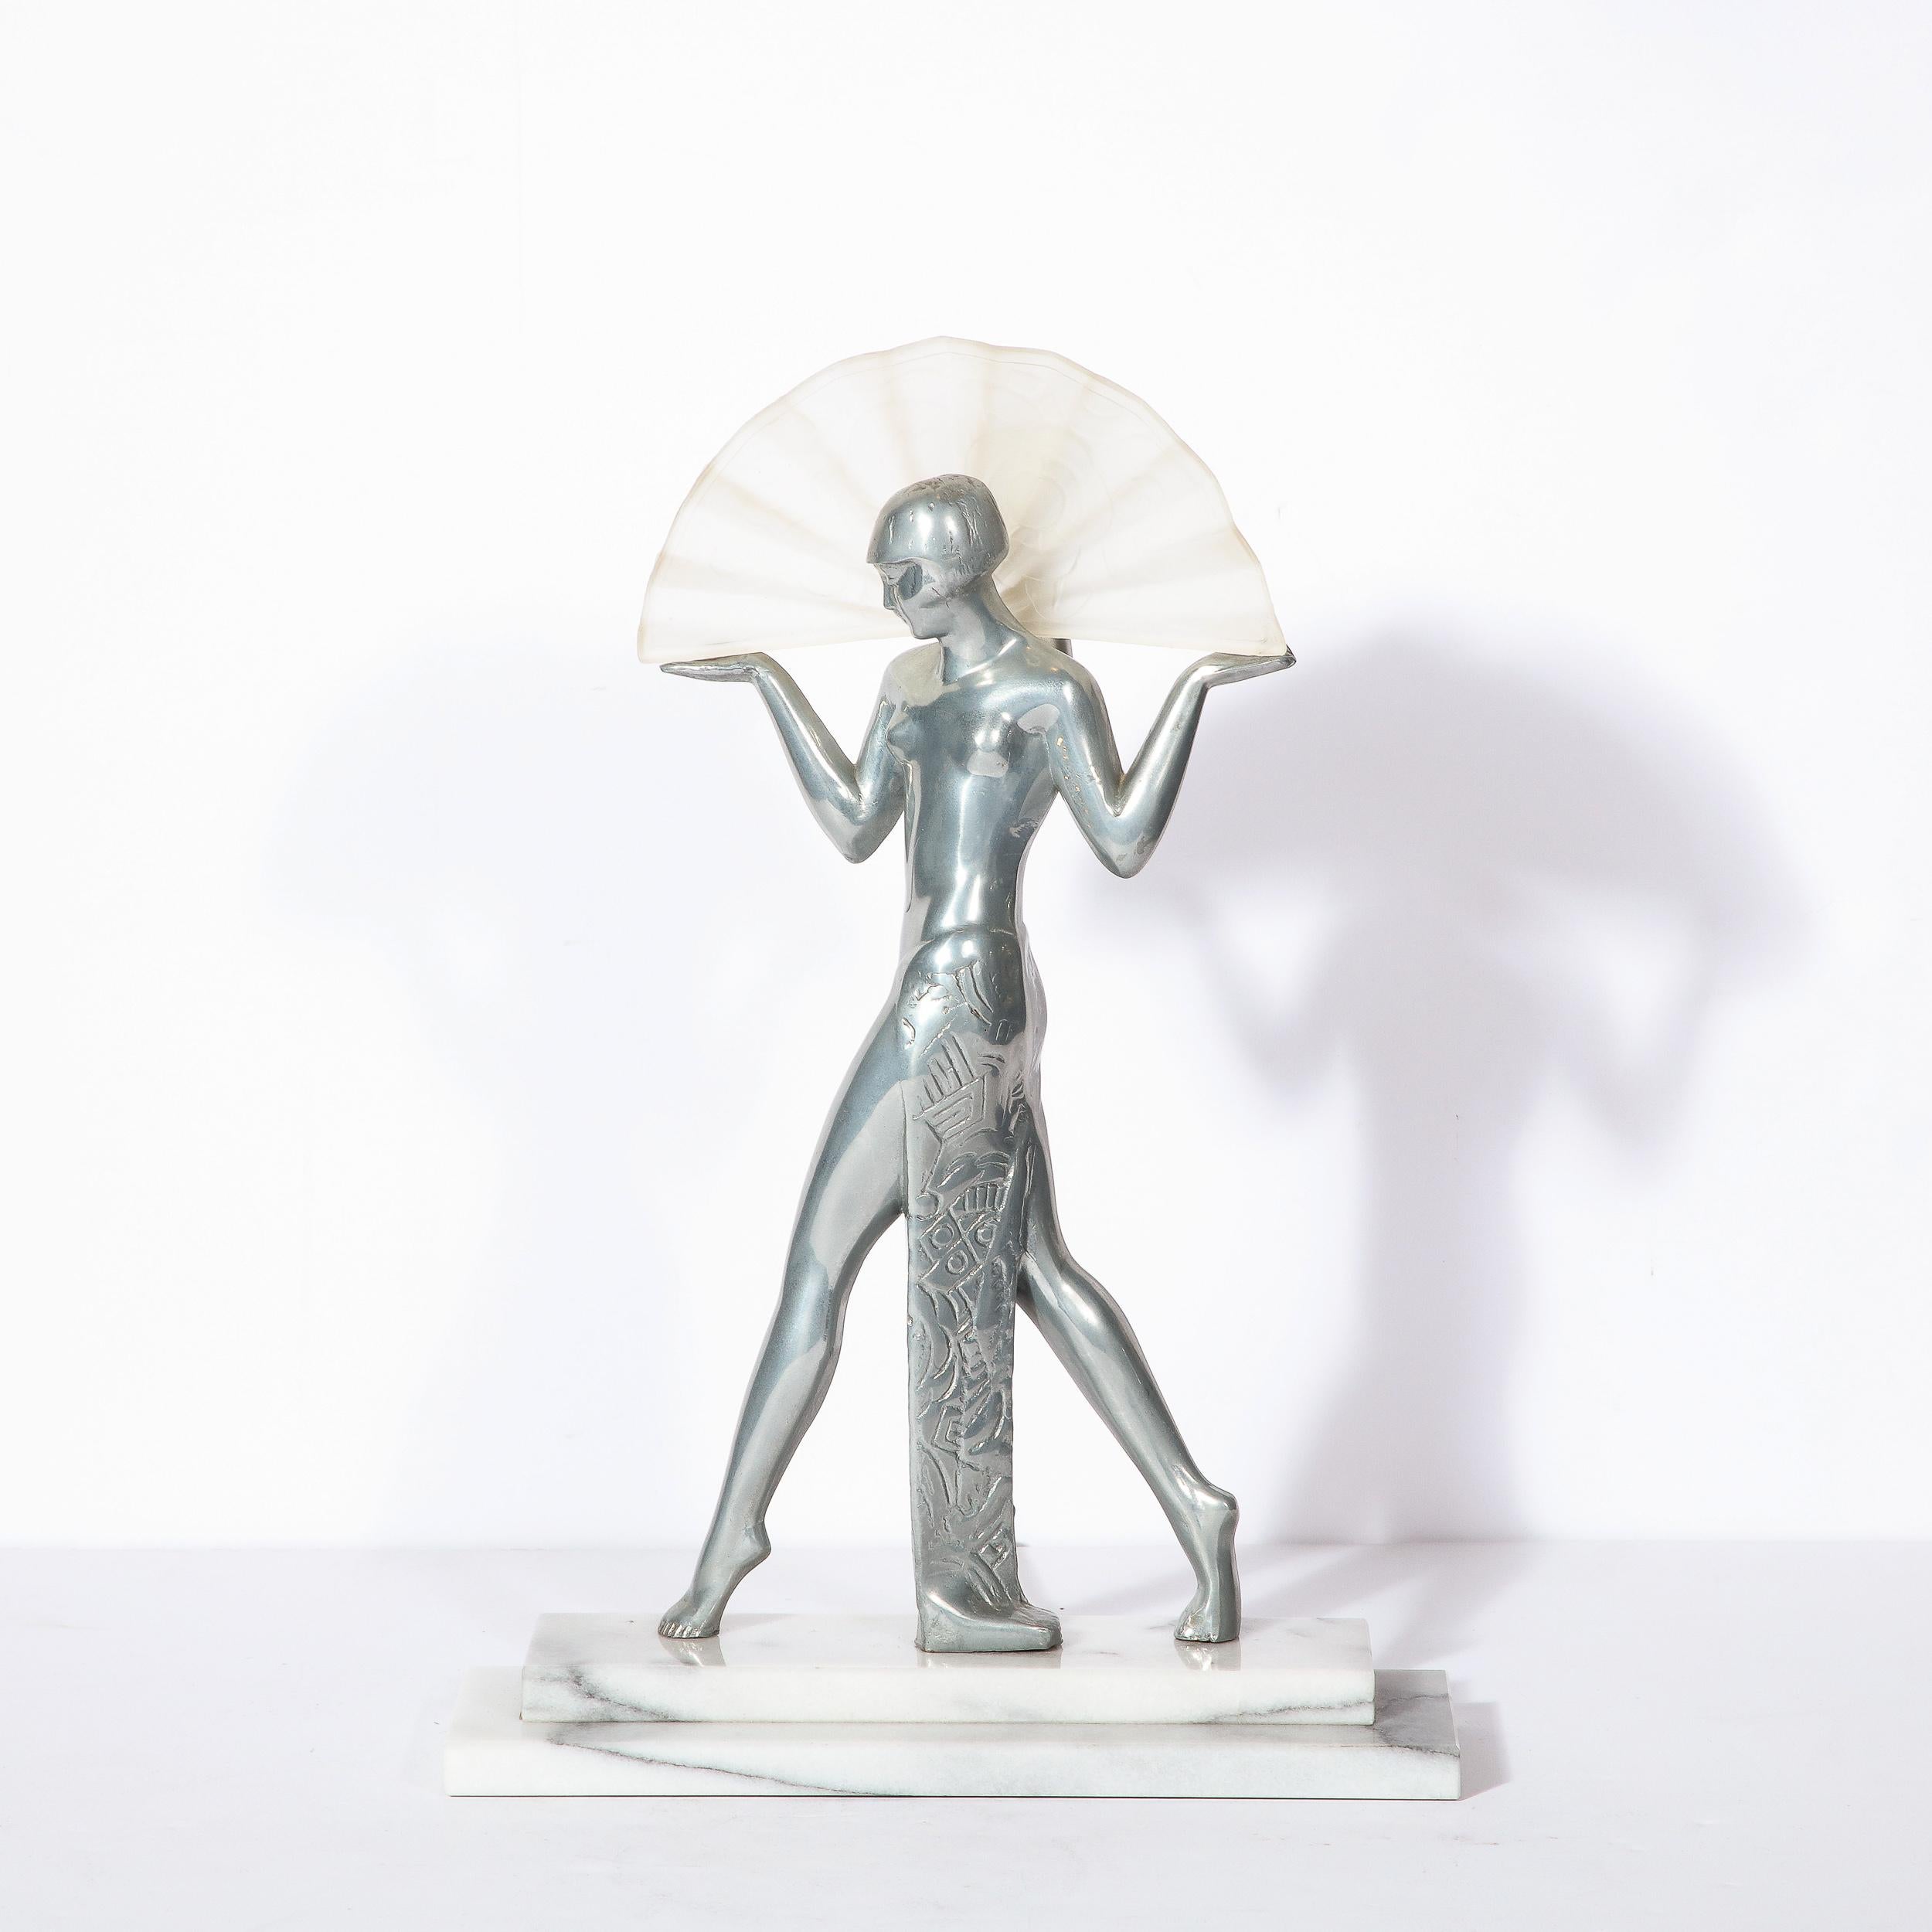 This elegant Art Deco revival table lamp was realized in the United States during the 20th century. It features a classic female flapper figurine realized in lustrous pewter strutting forward on her toes, her palms extended outwards and facing